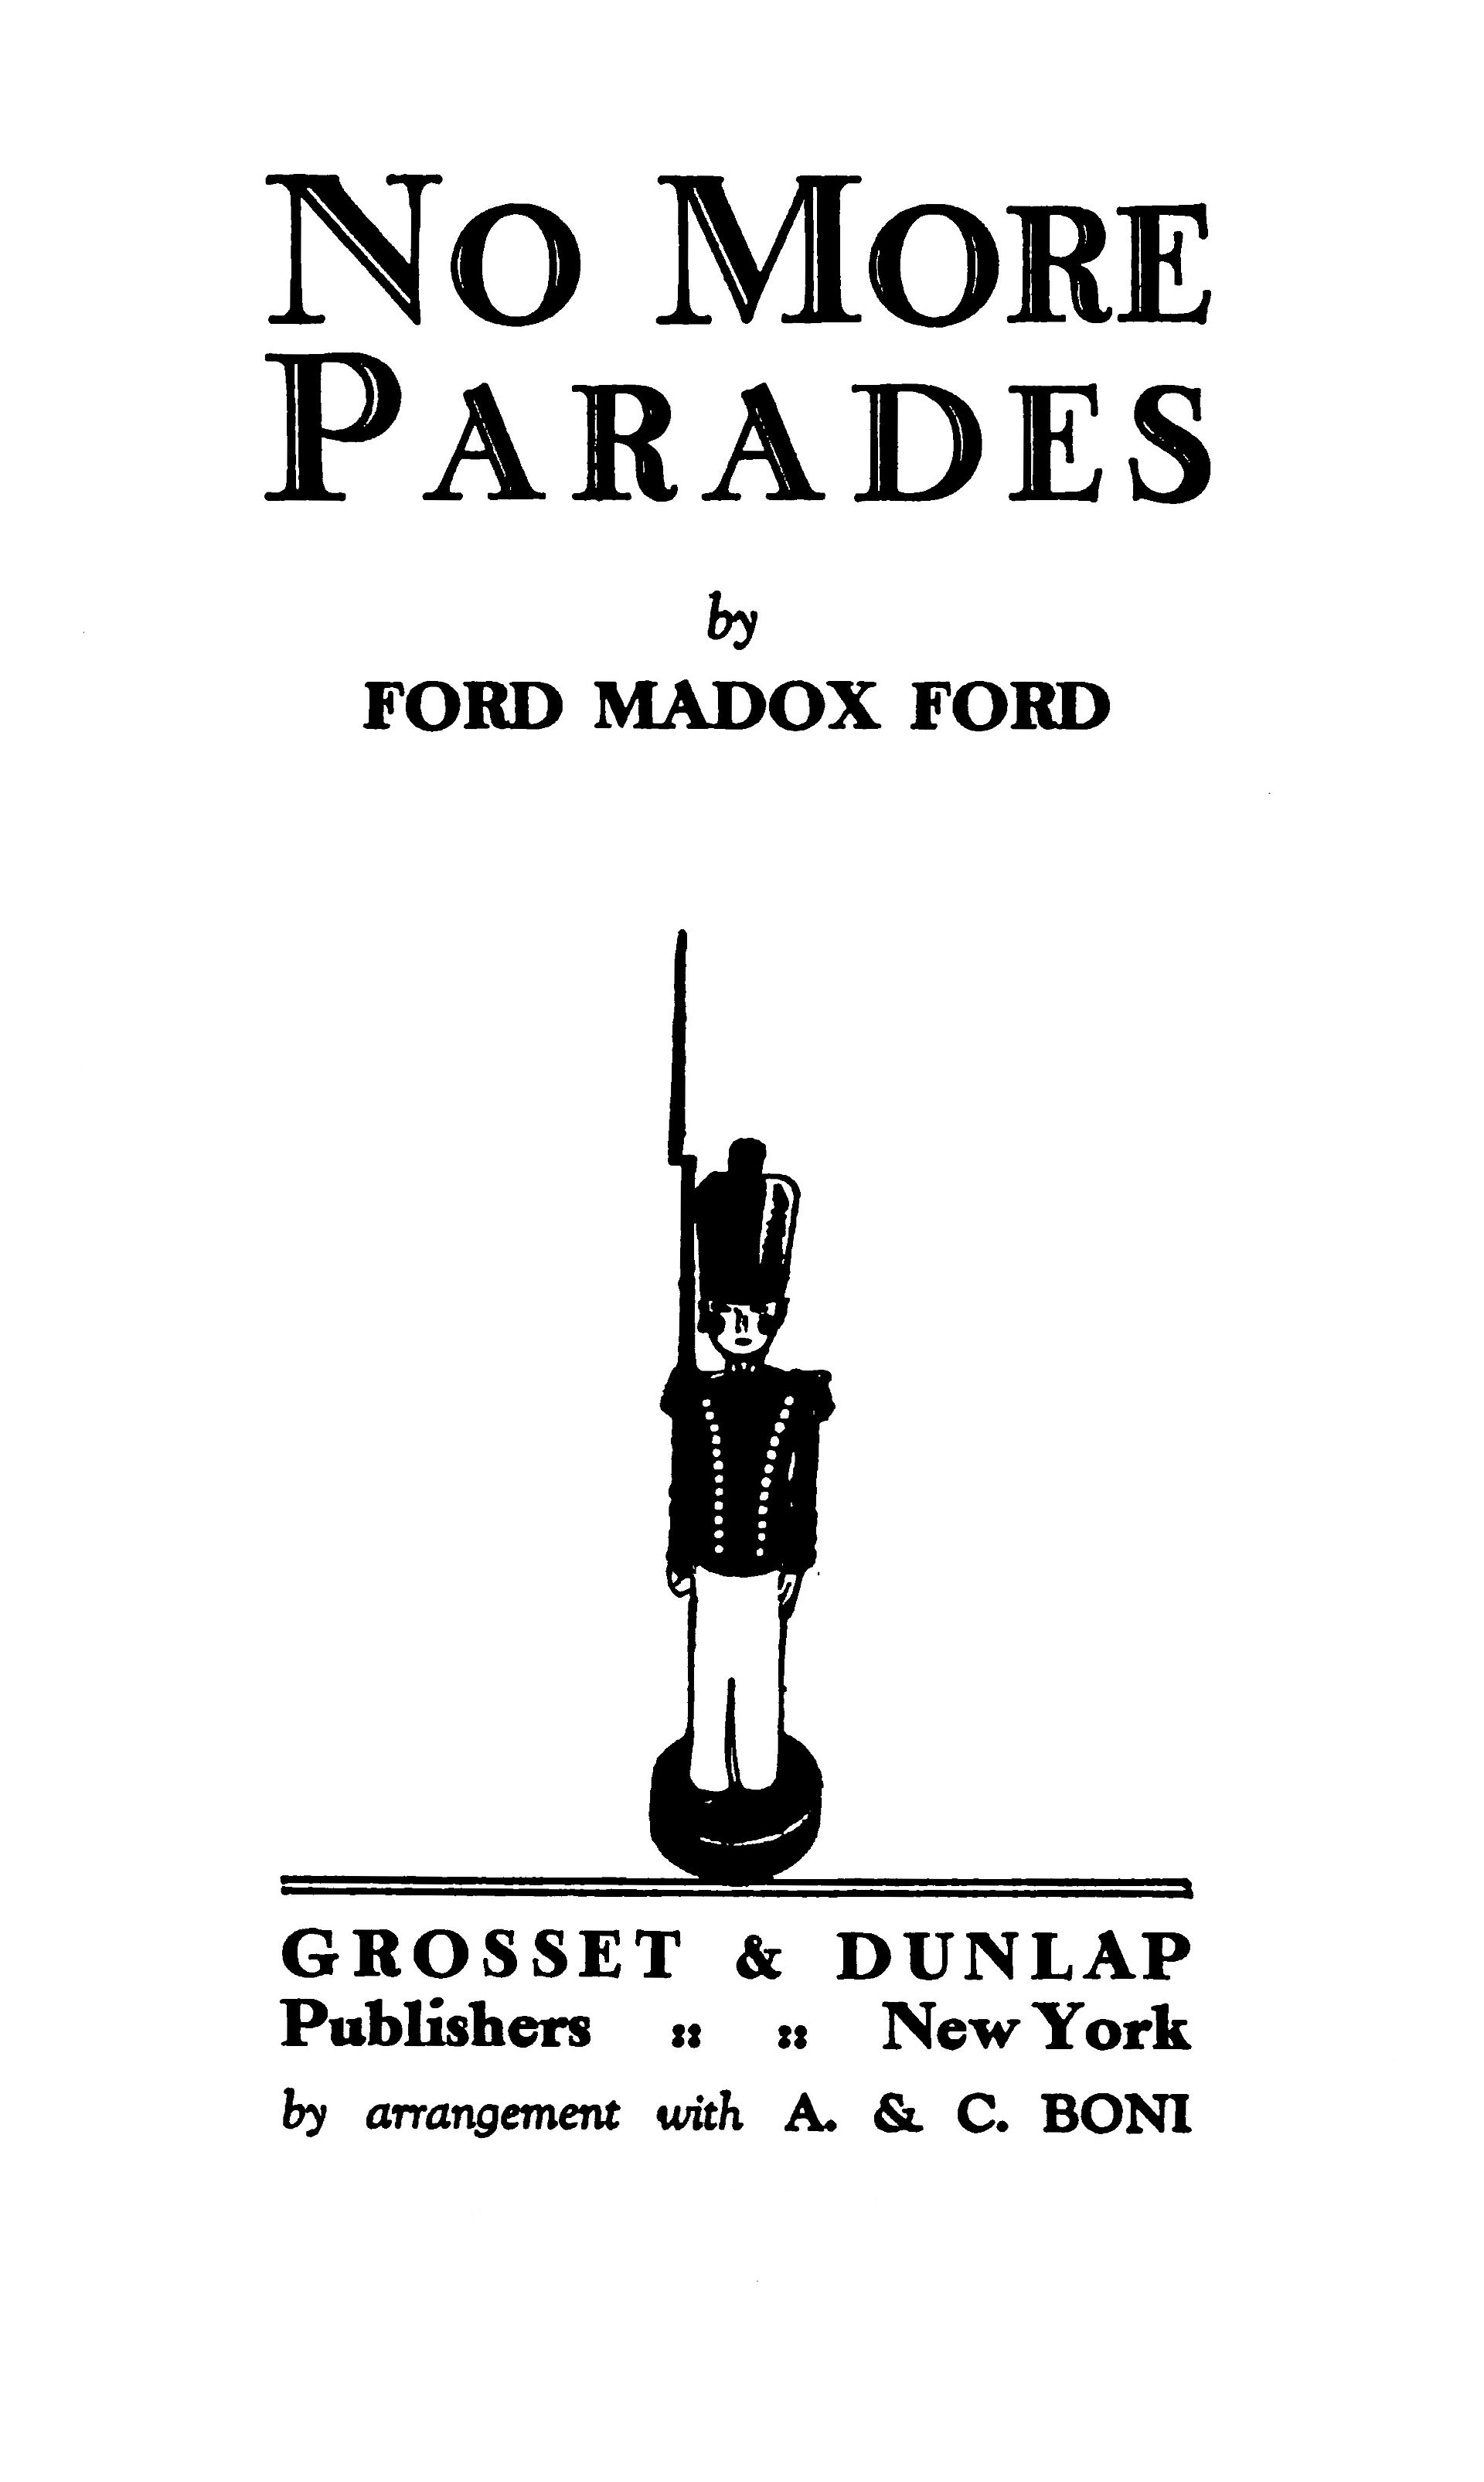 The Project Gutenberg eBook of No More Parades, by Ford Madox Ford. pic